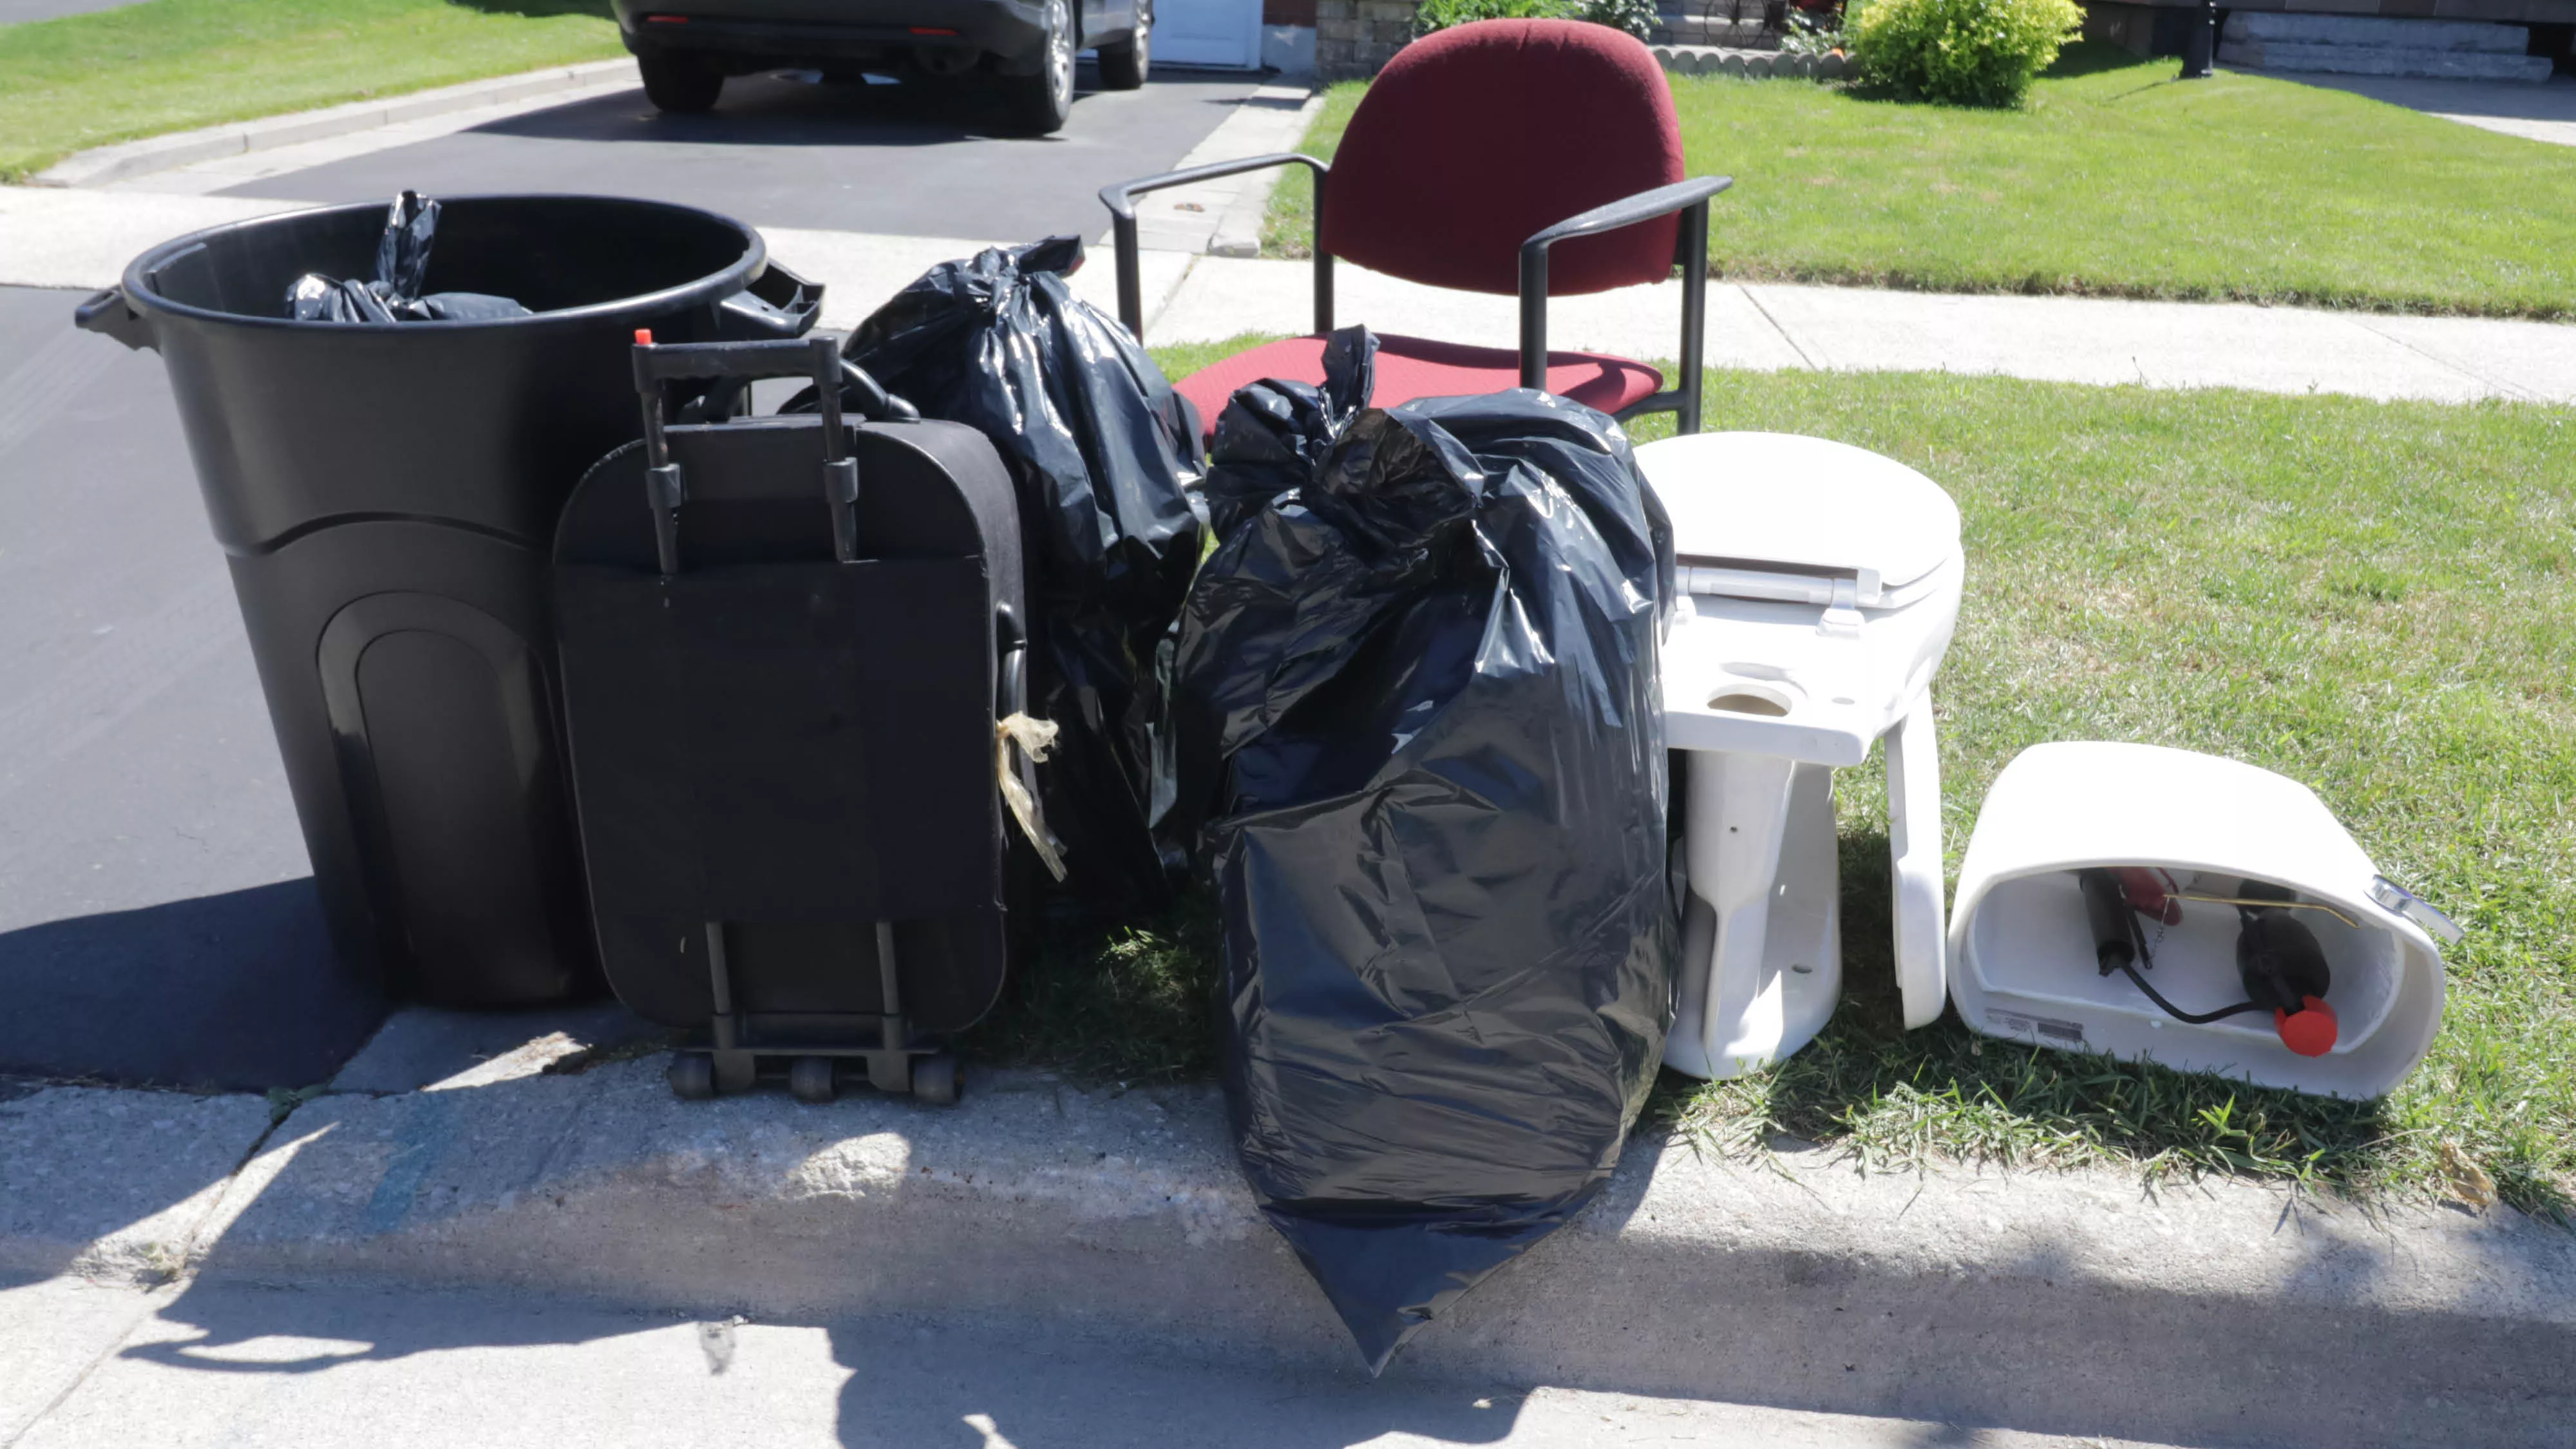 garbage bags, toilet, chair at the curb